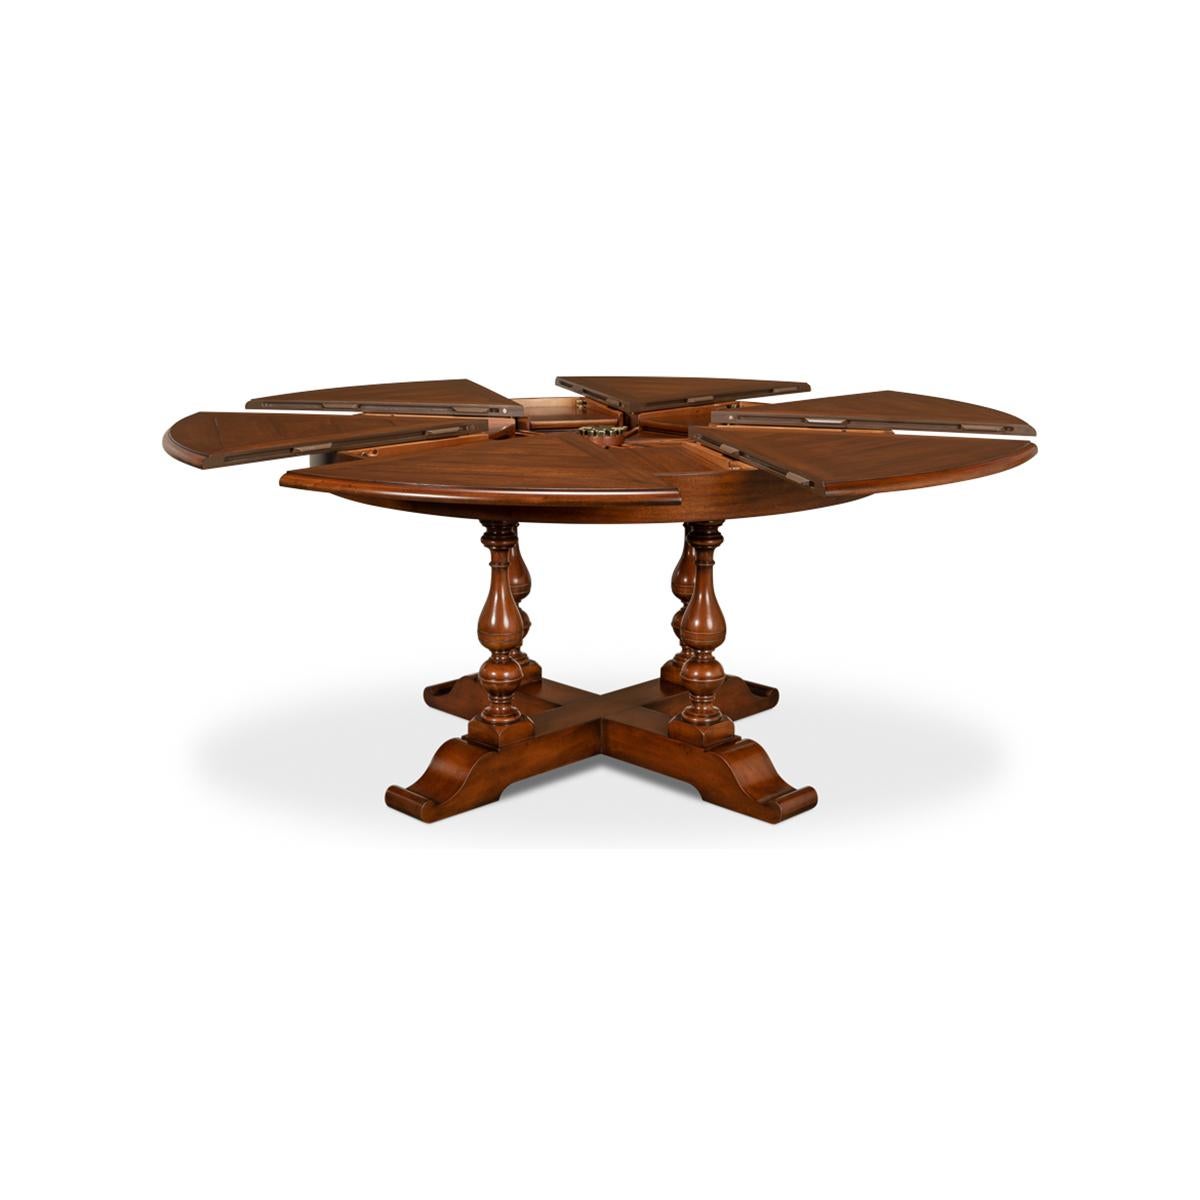 Elizabethan Early English Style Round Extension Dining Table, 70